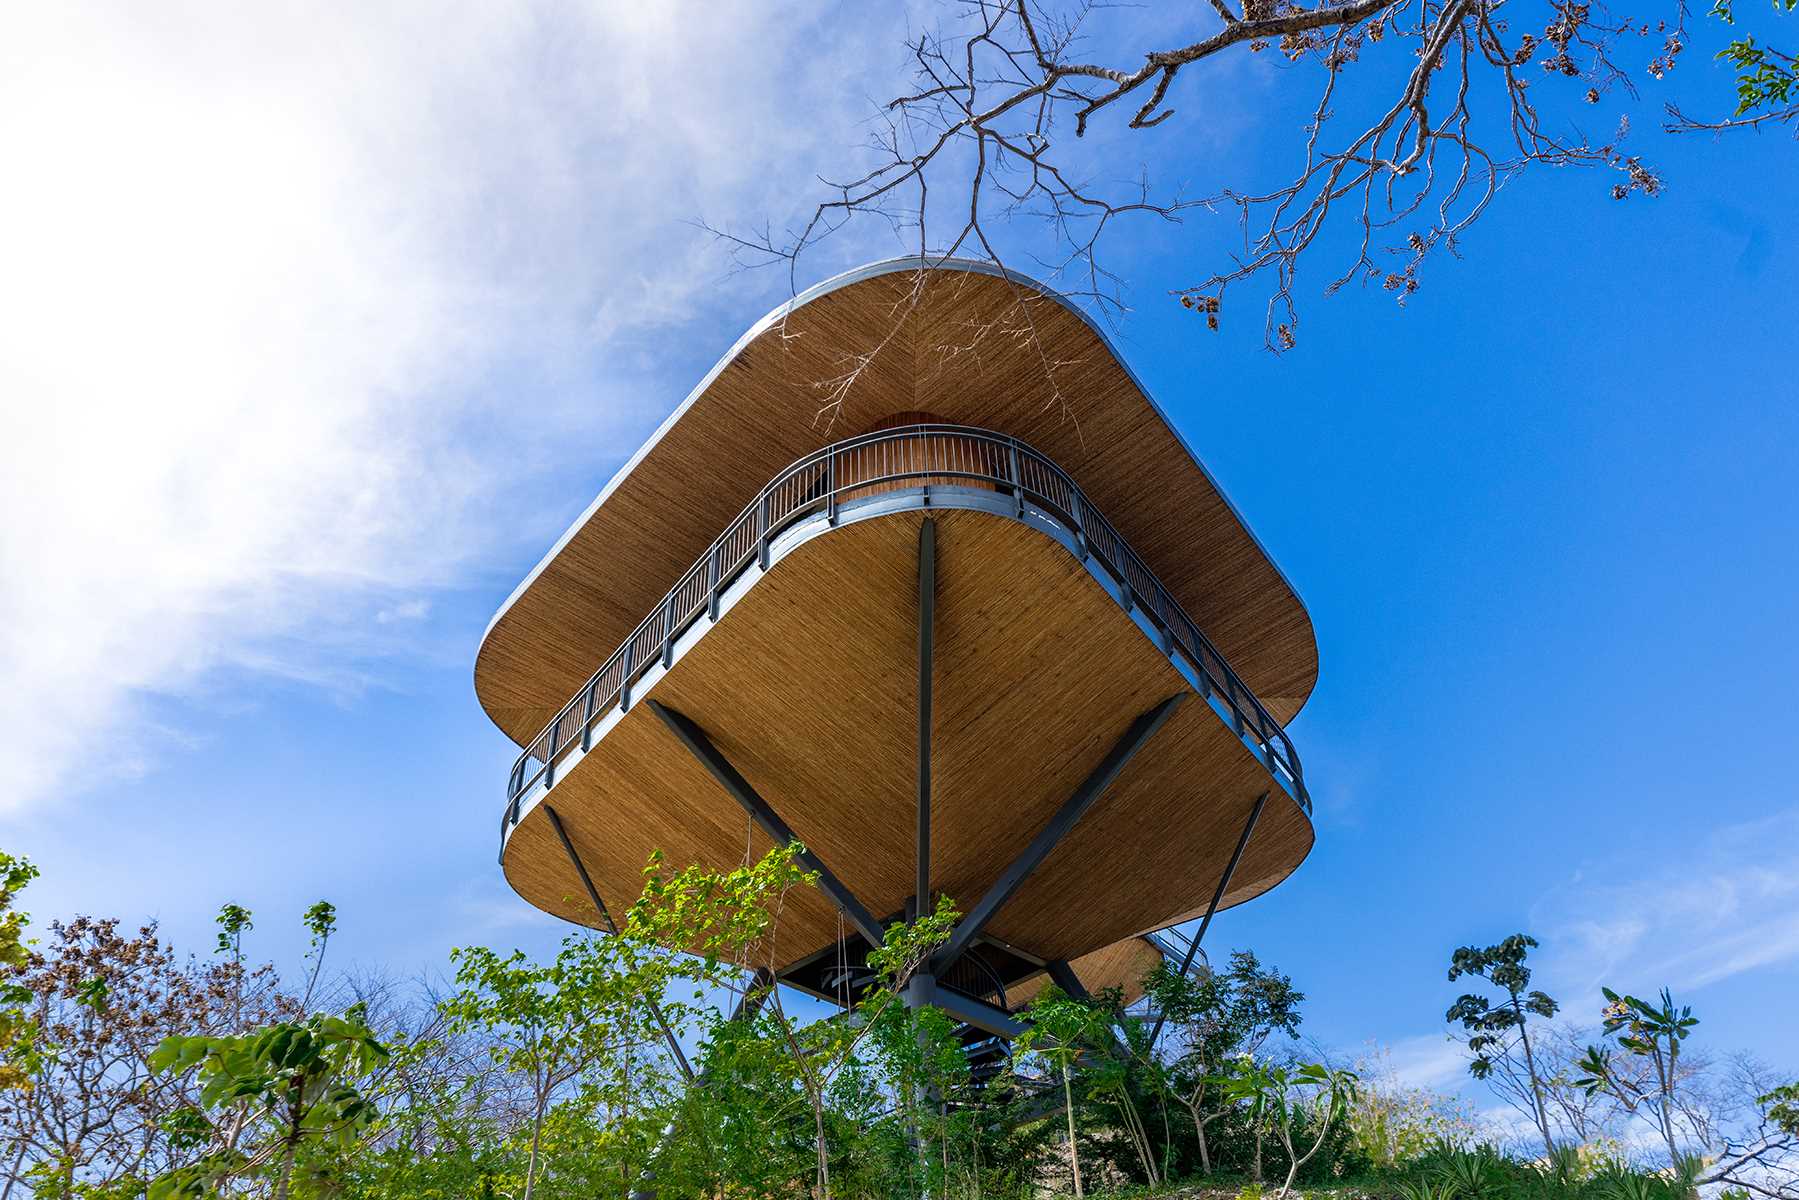 A modern hotel in Costa Rica has a series of elevated cabins inspired by tree houses.